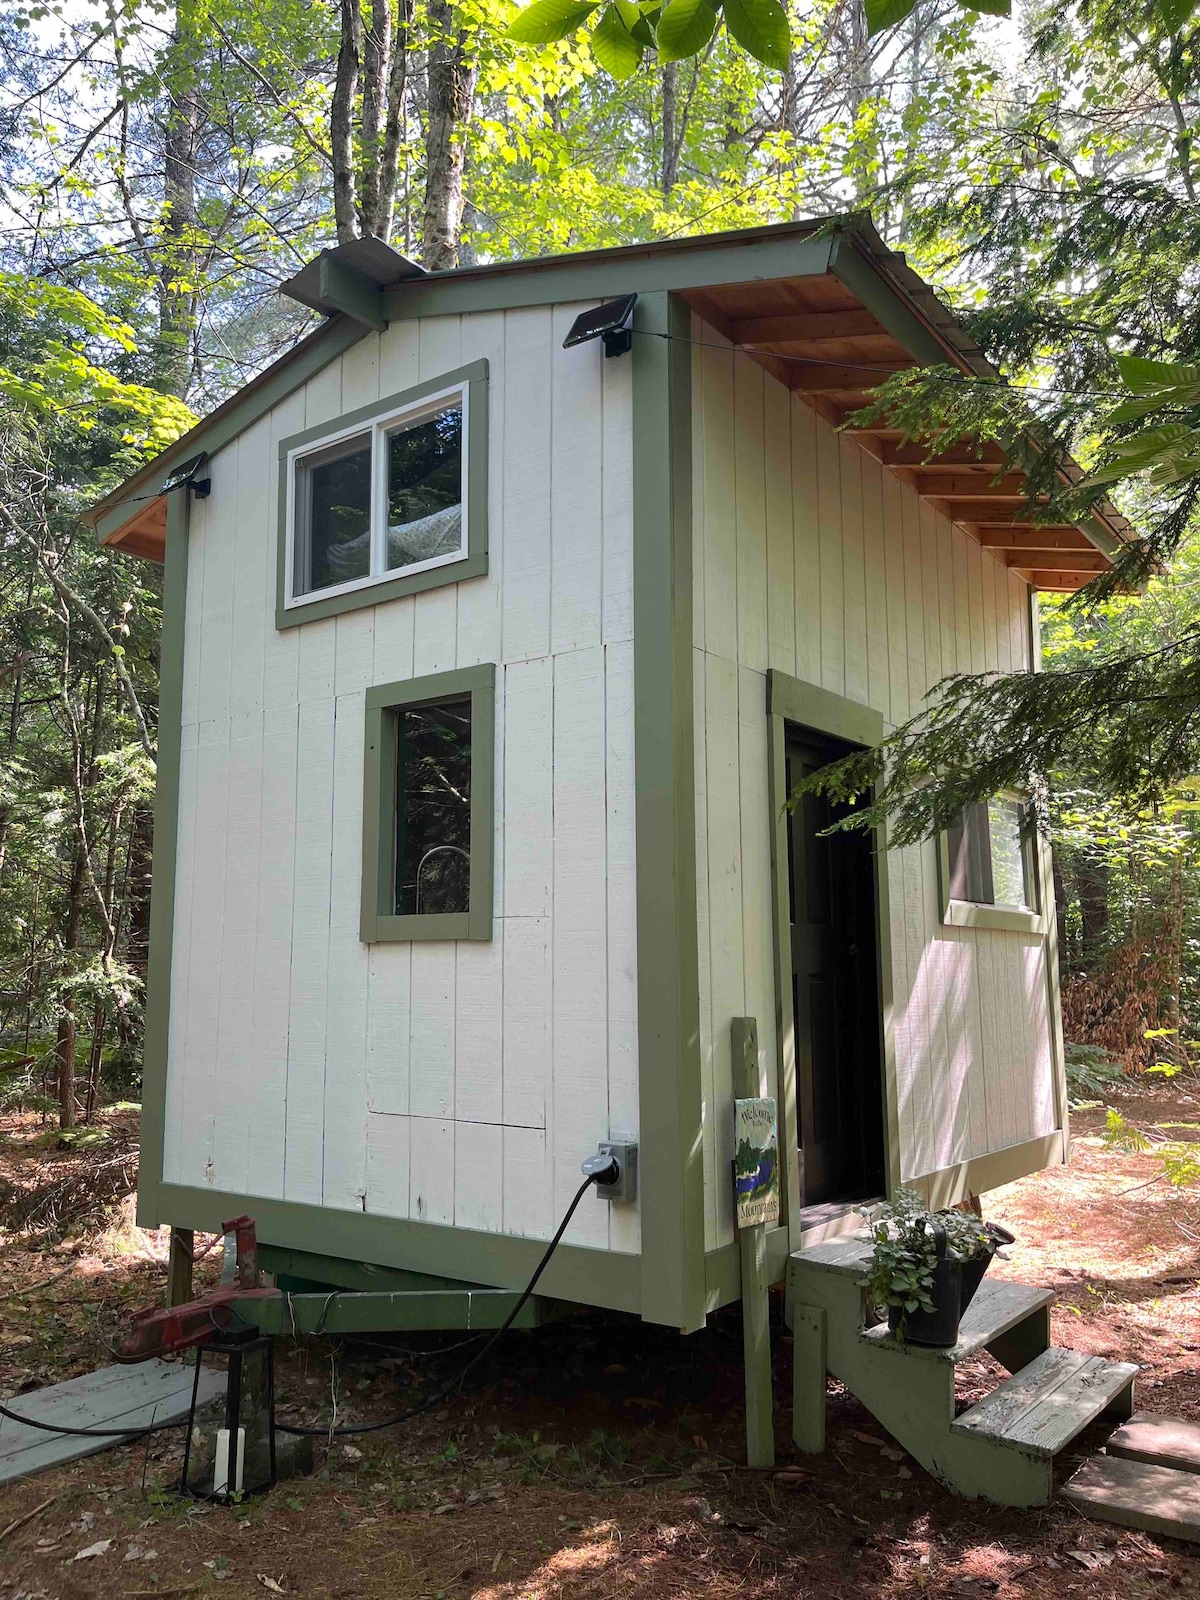 Tiny house glamping in woods of New Hampshire